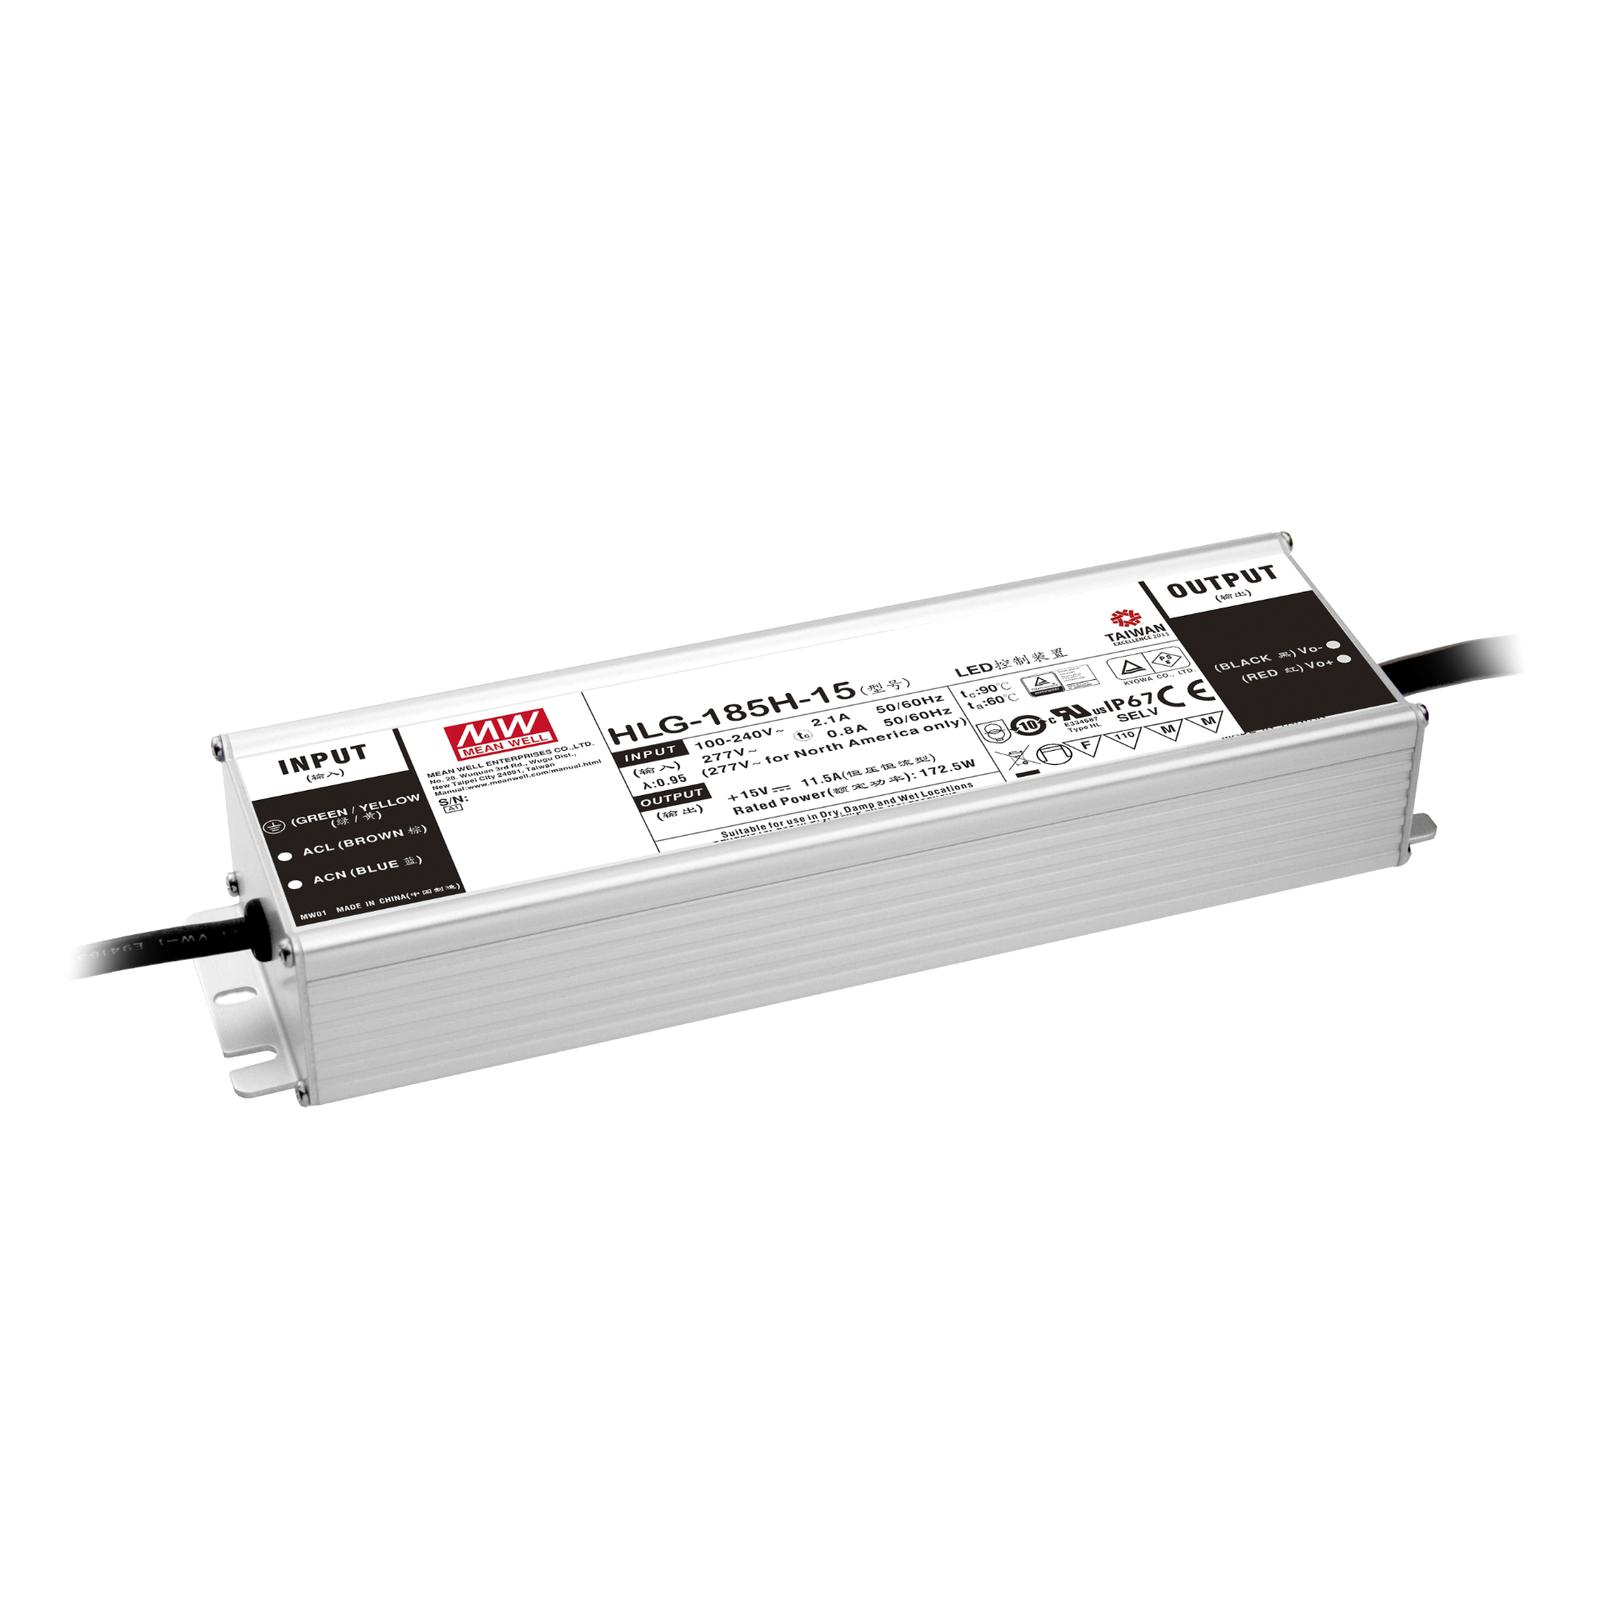 MEANWELL LED Power Supply 187W / 24V IP67